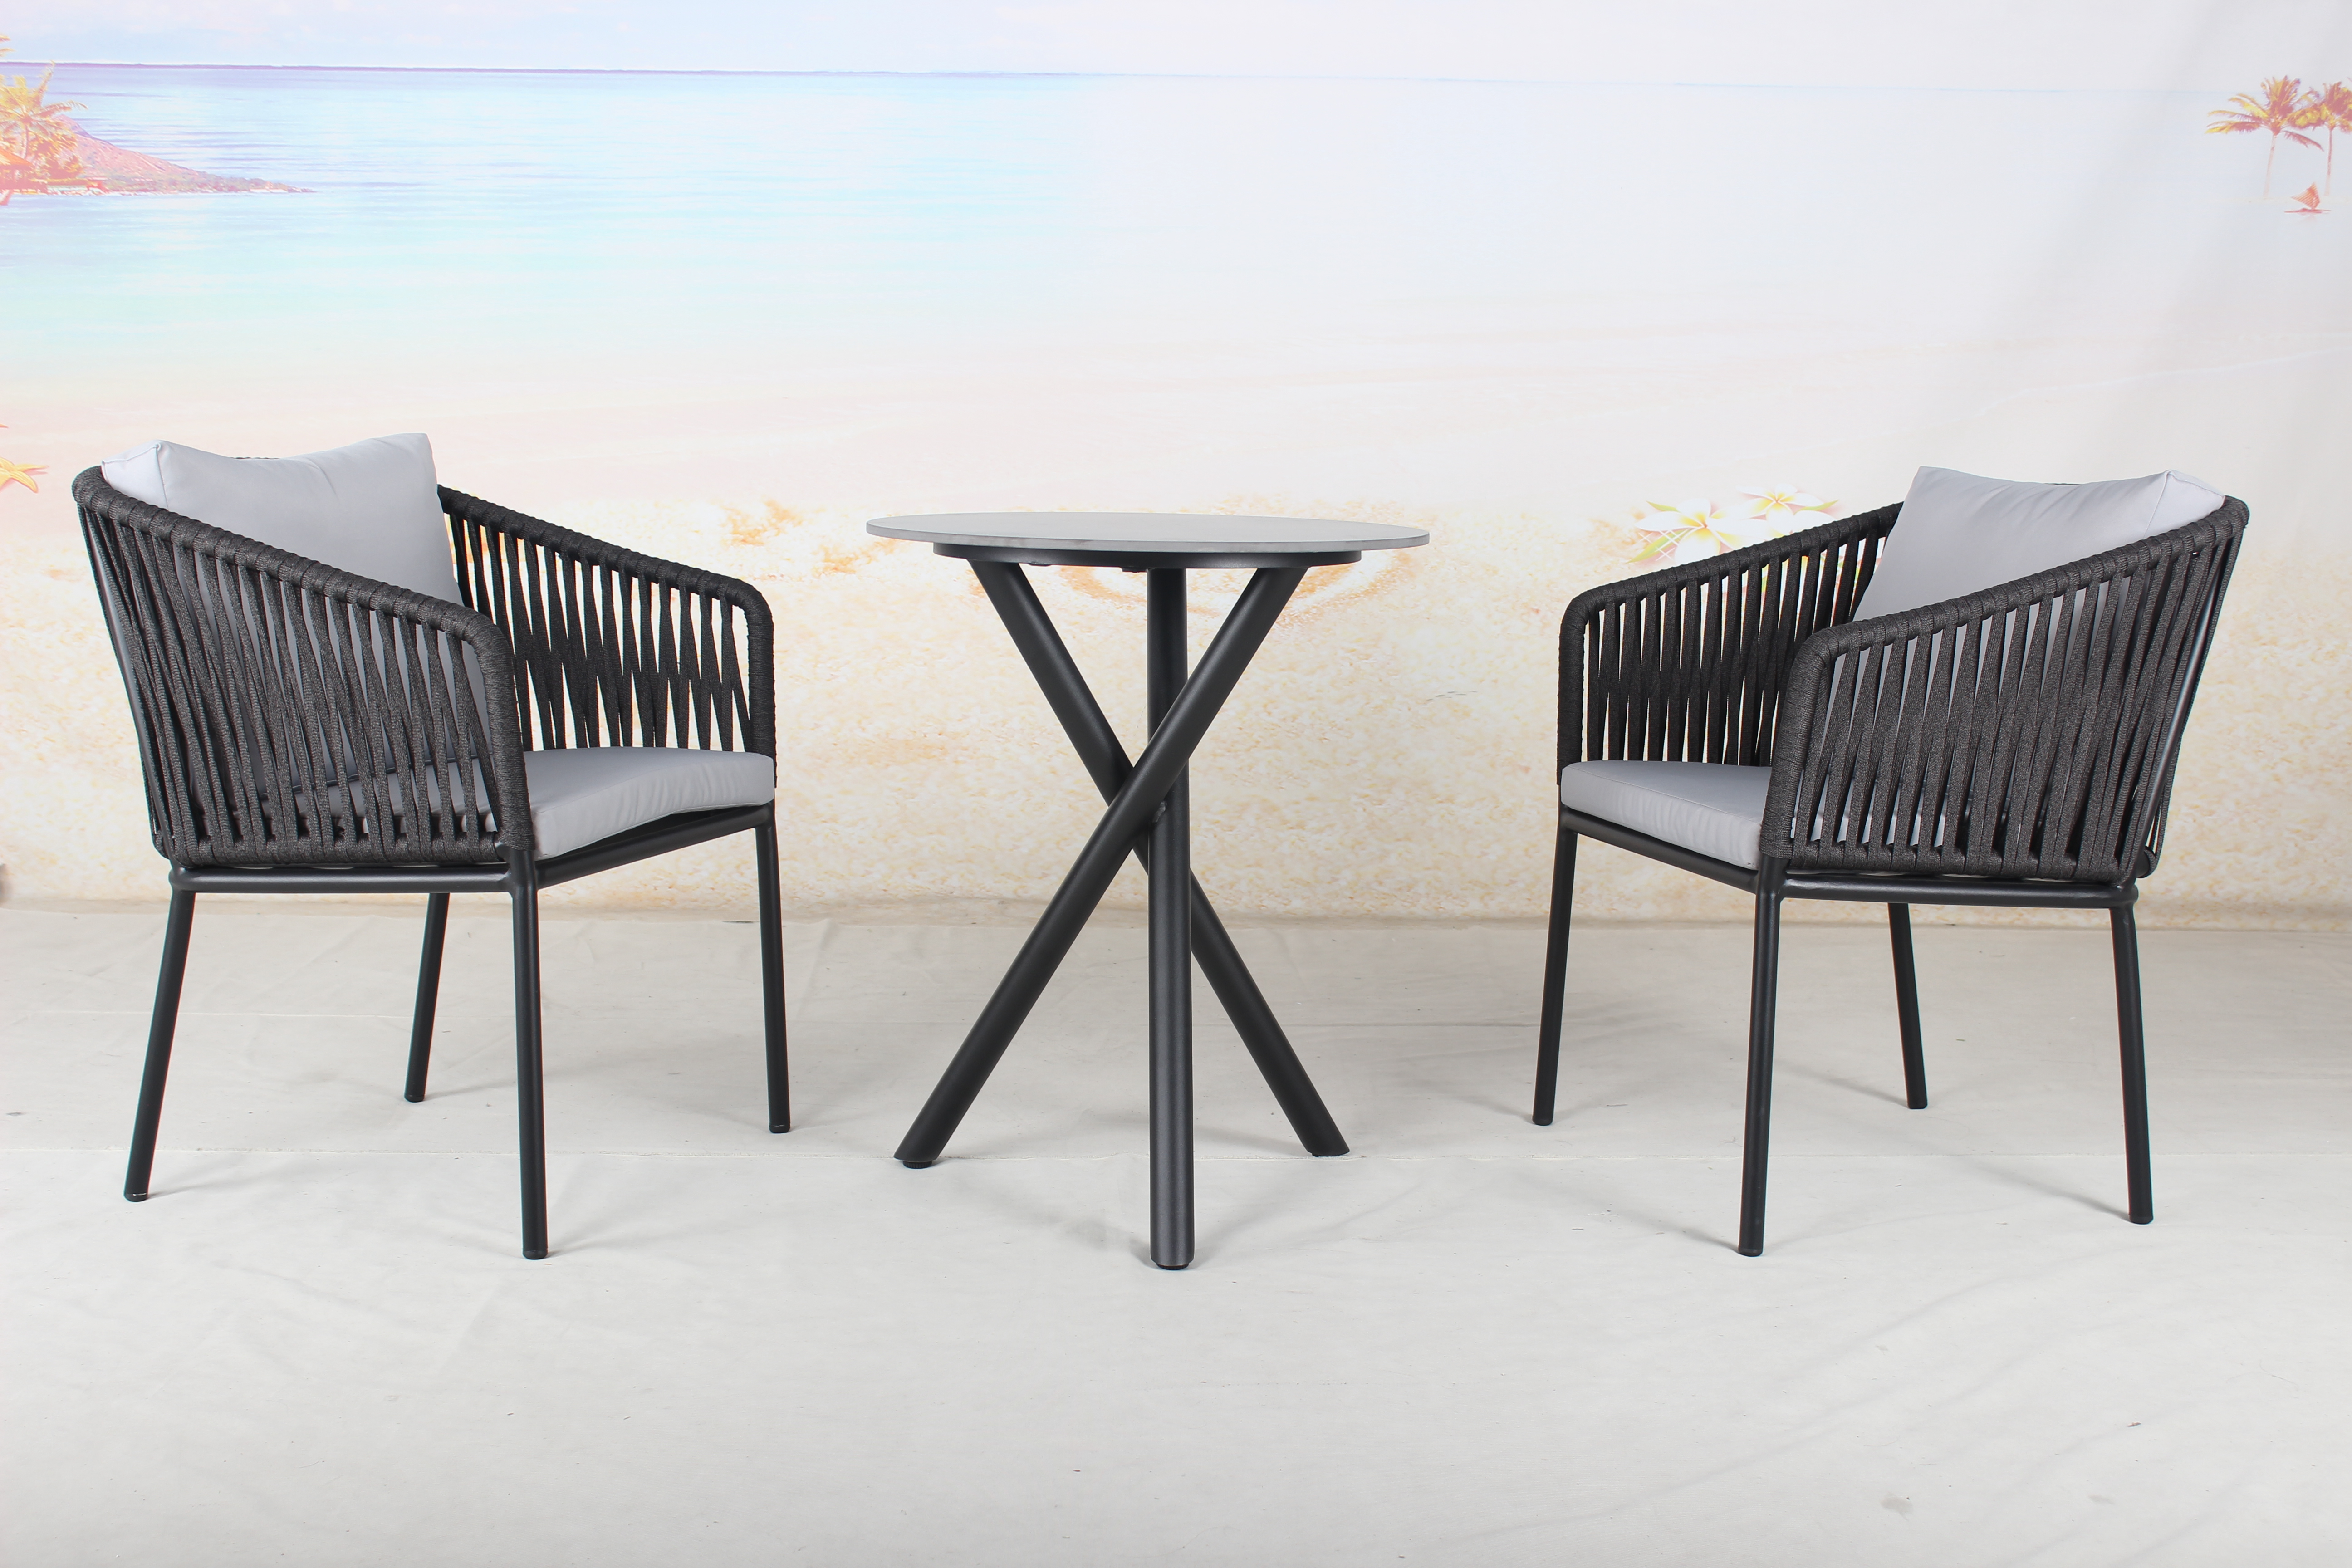 3 piece balcony black table and chairs set